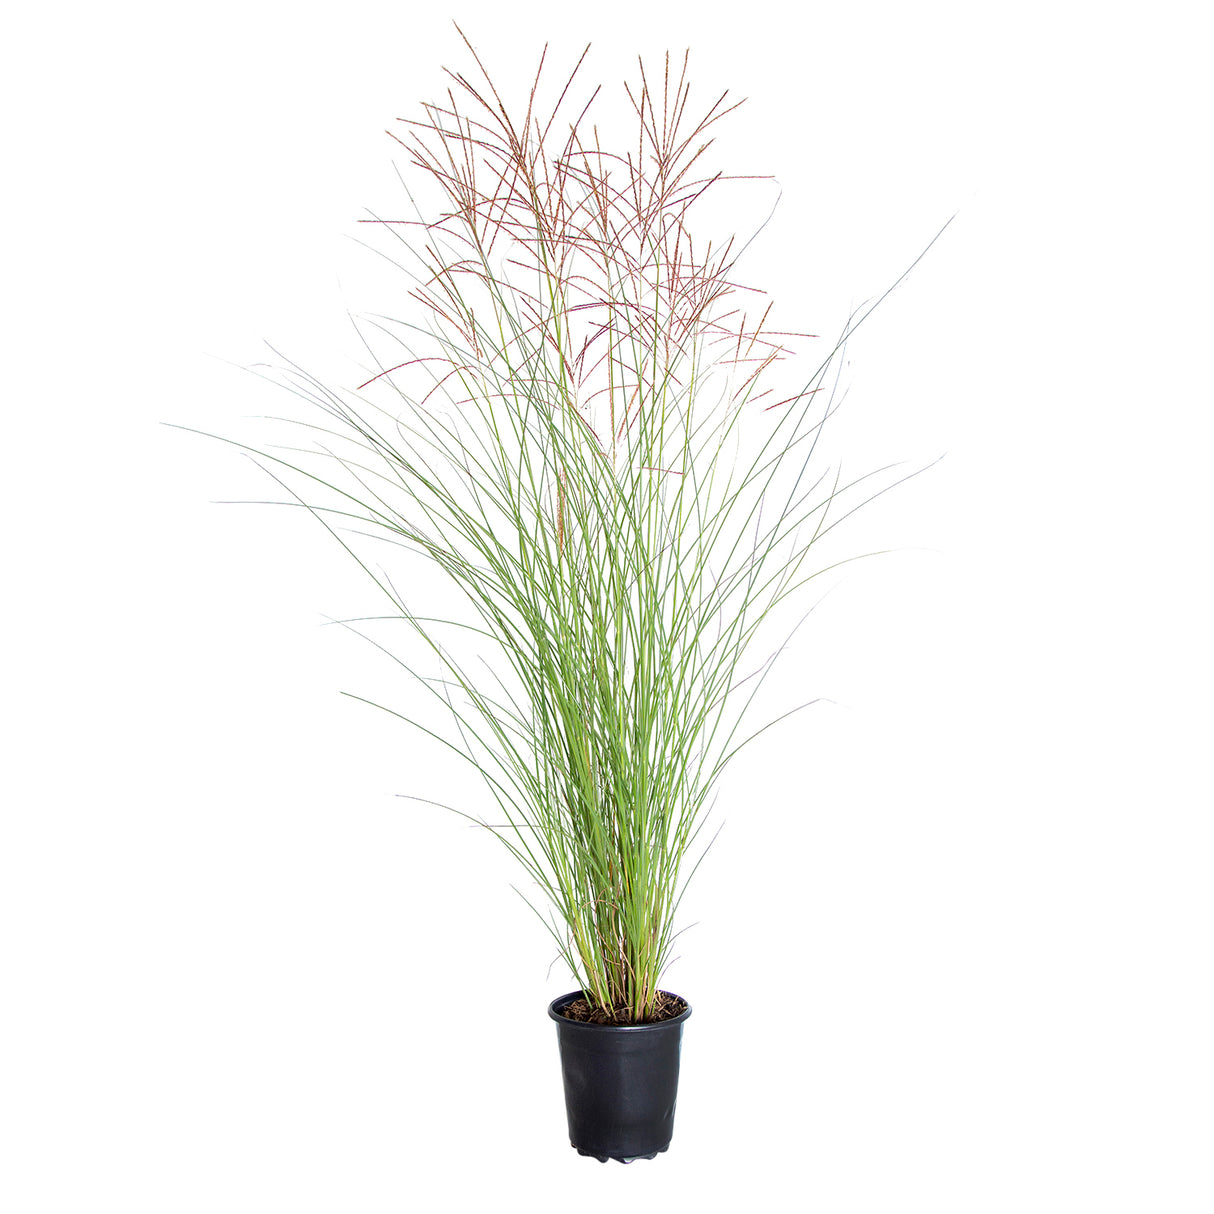 2.5 Quart Maiden Grass with reddish pink tips and long flowing green foliage in a black nursery pot on a white background